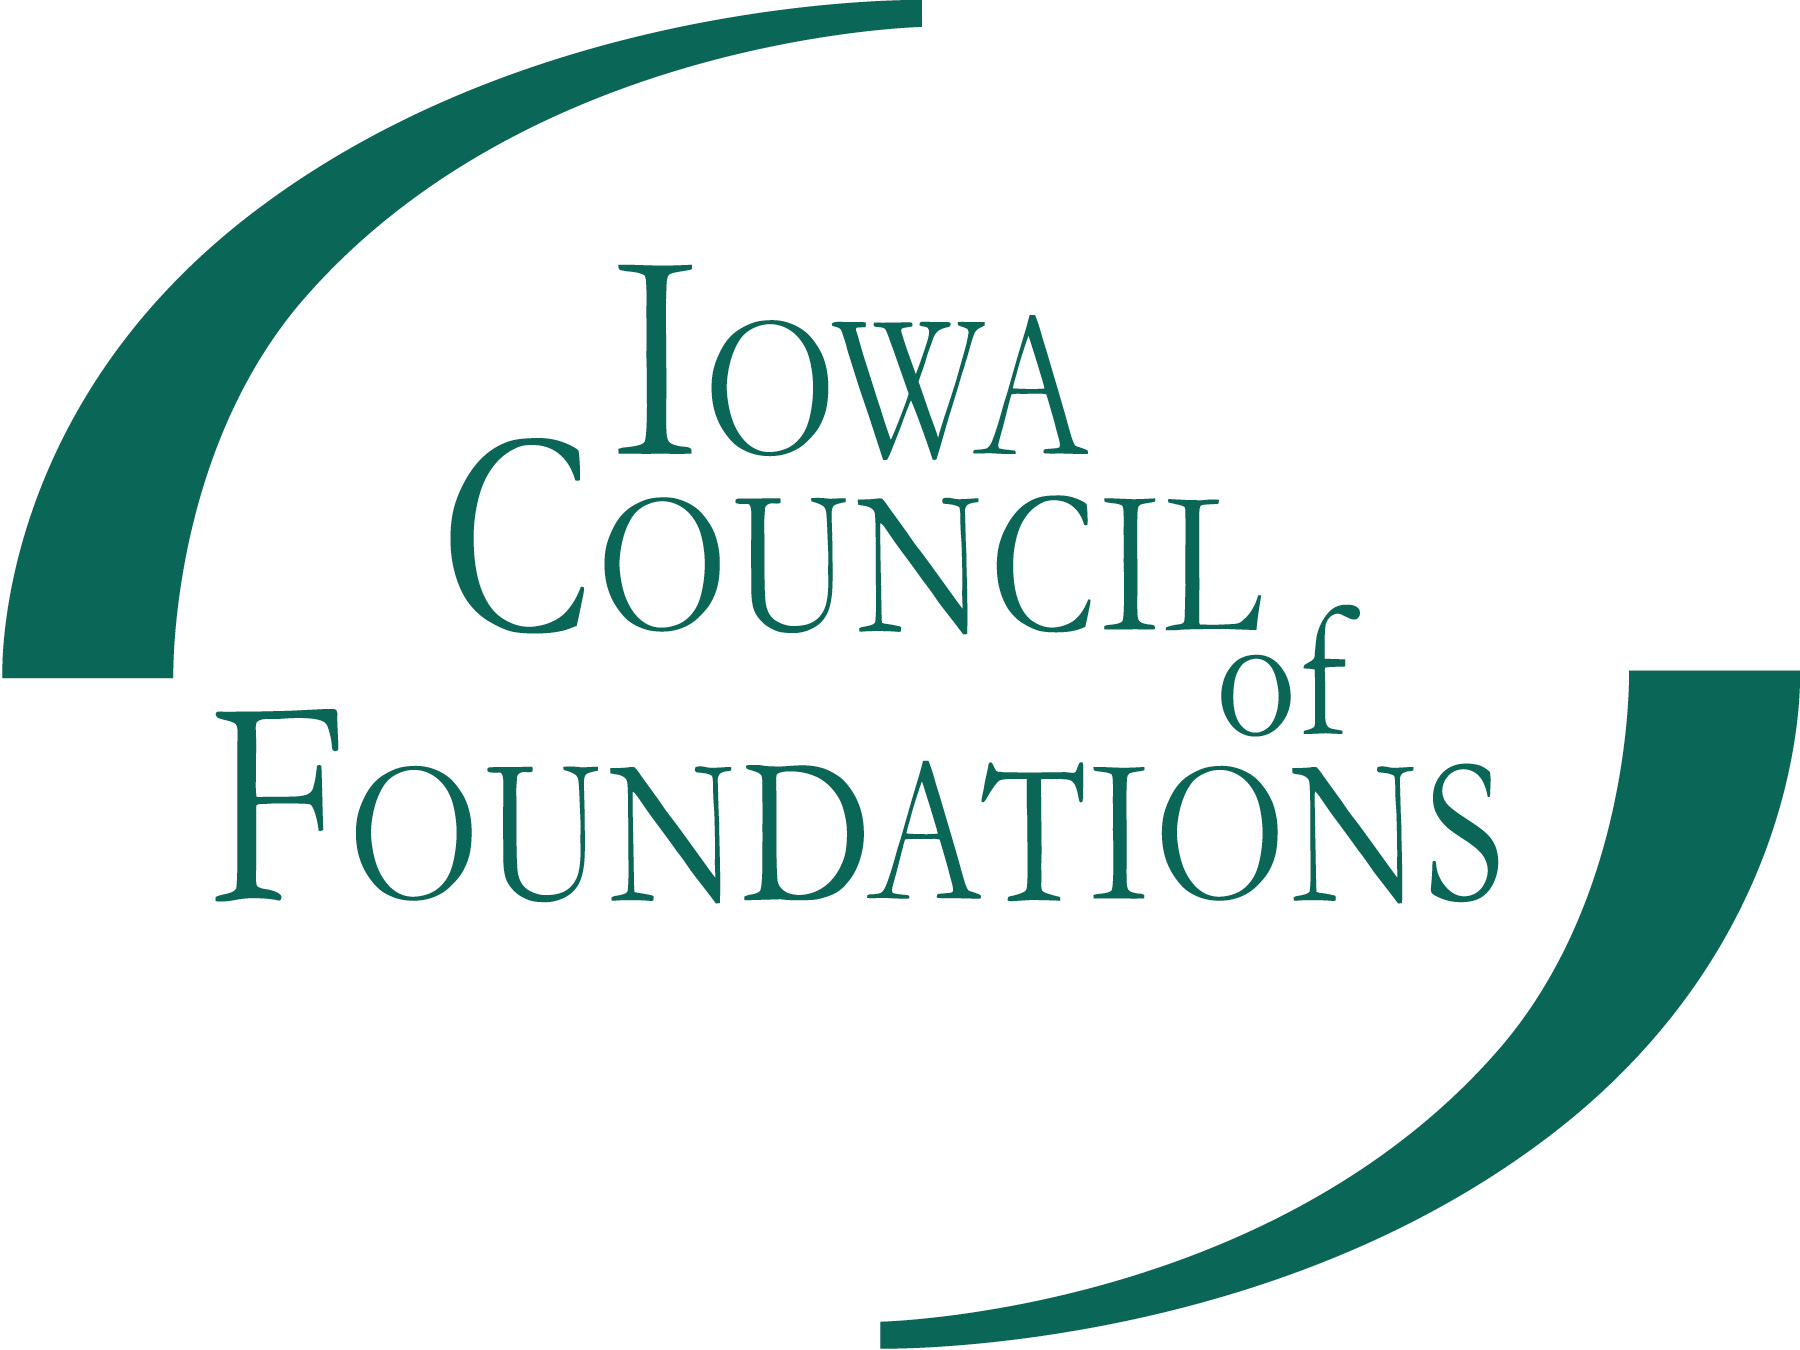 Iowa Council of Foundations